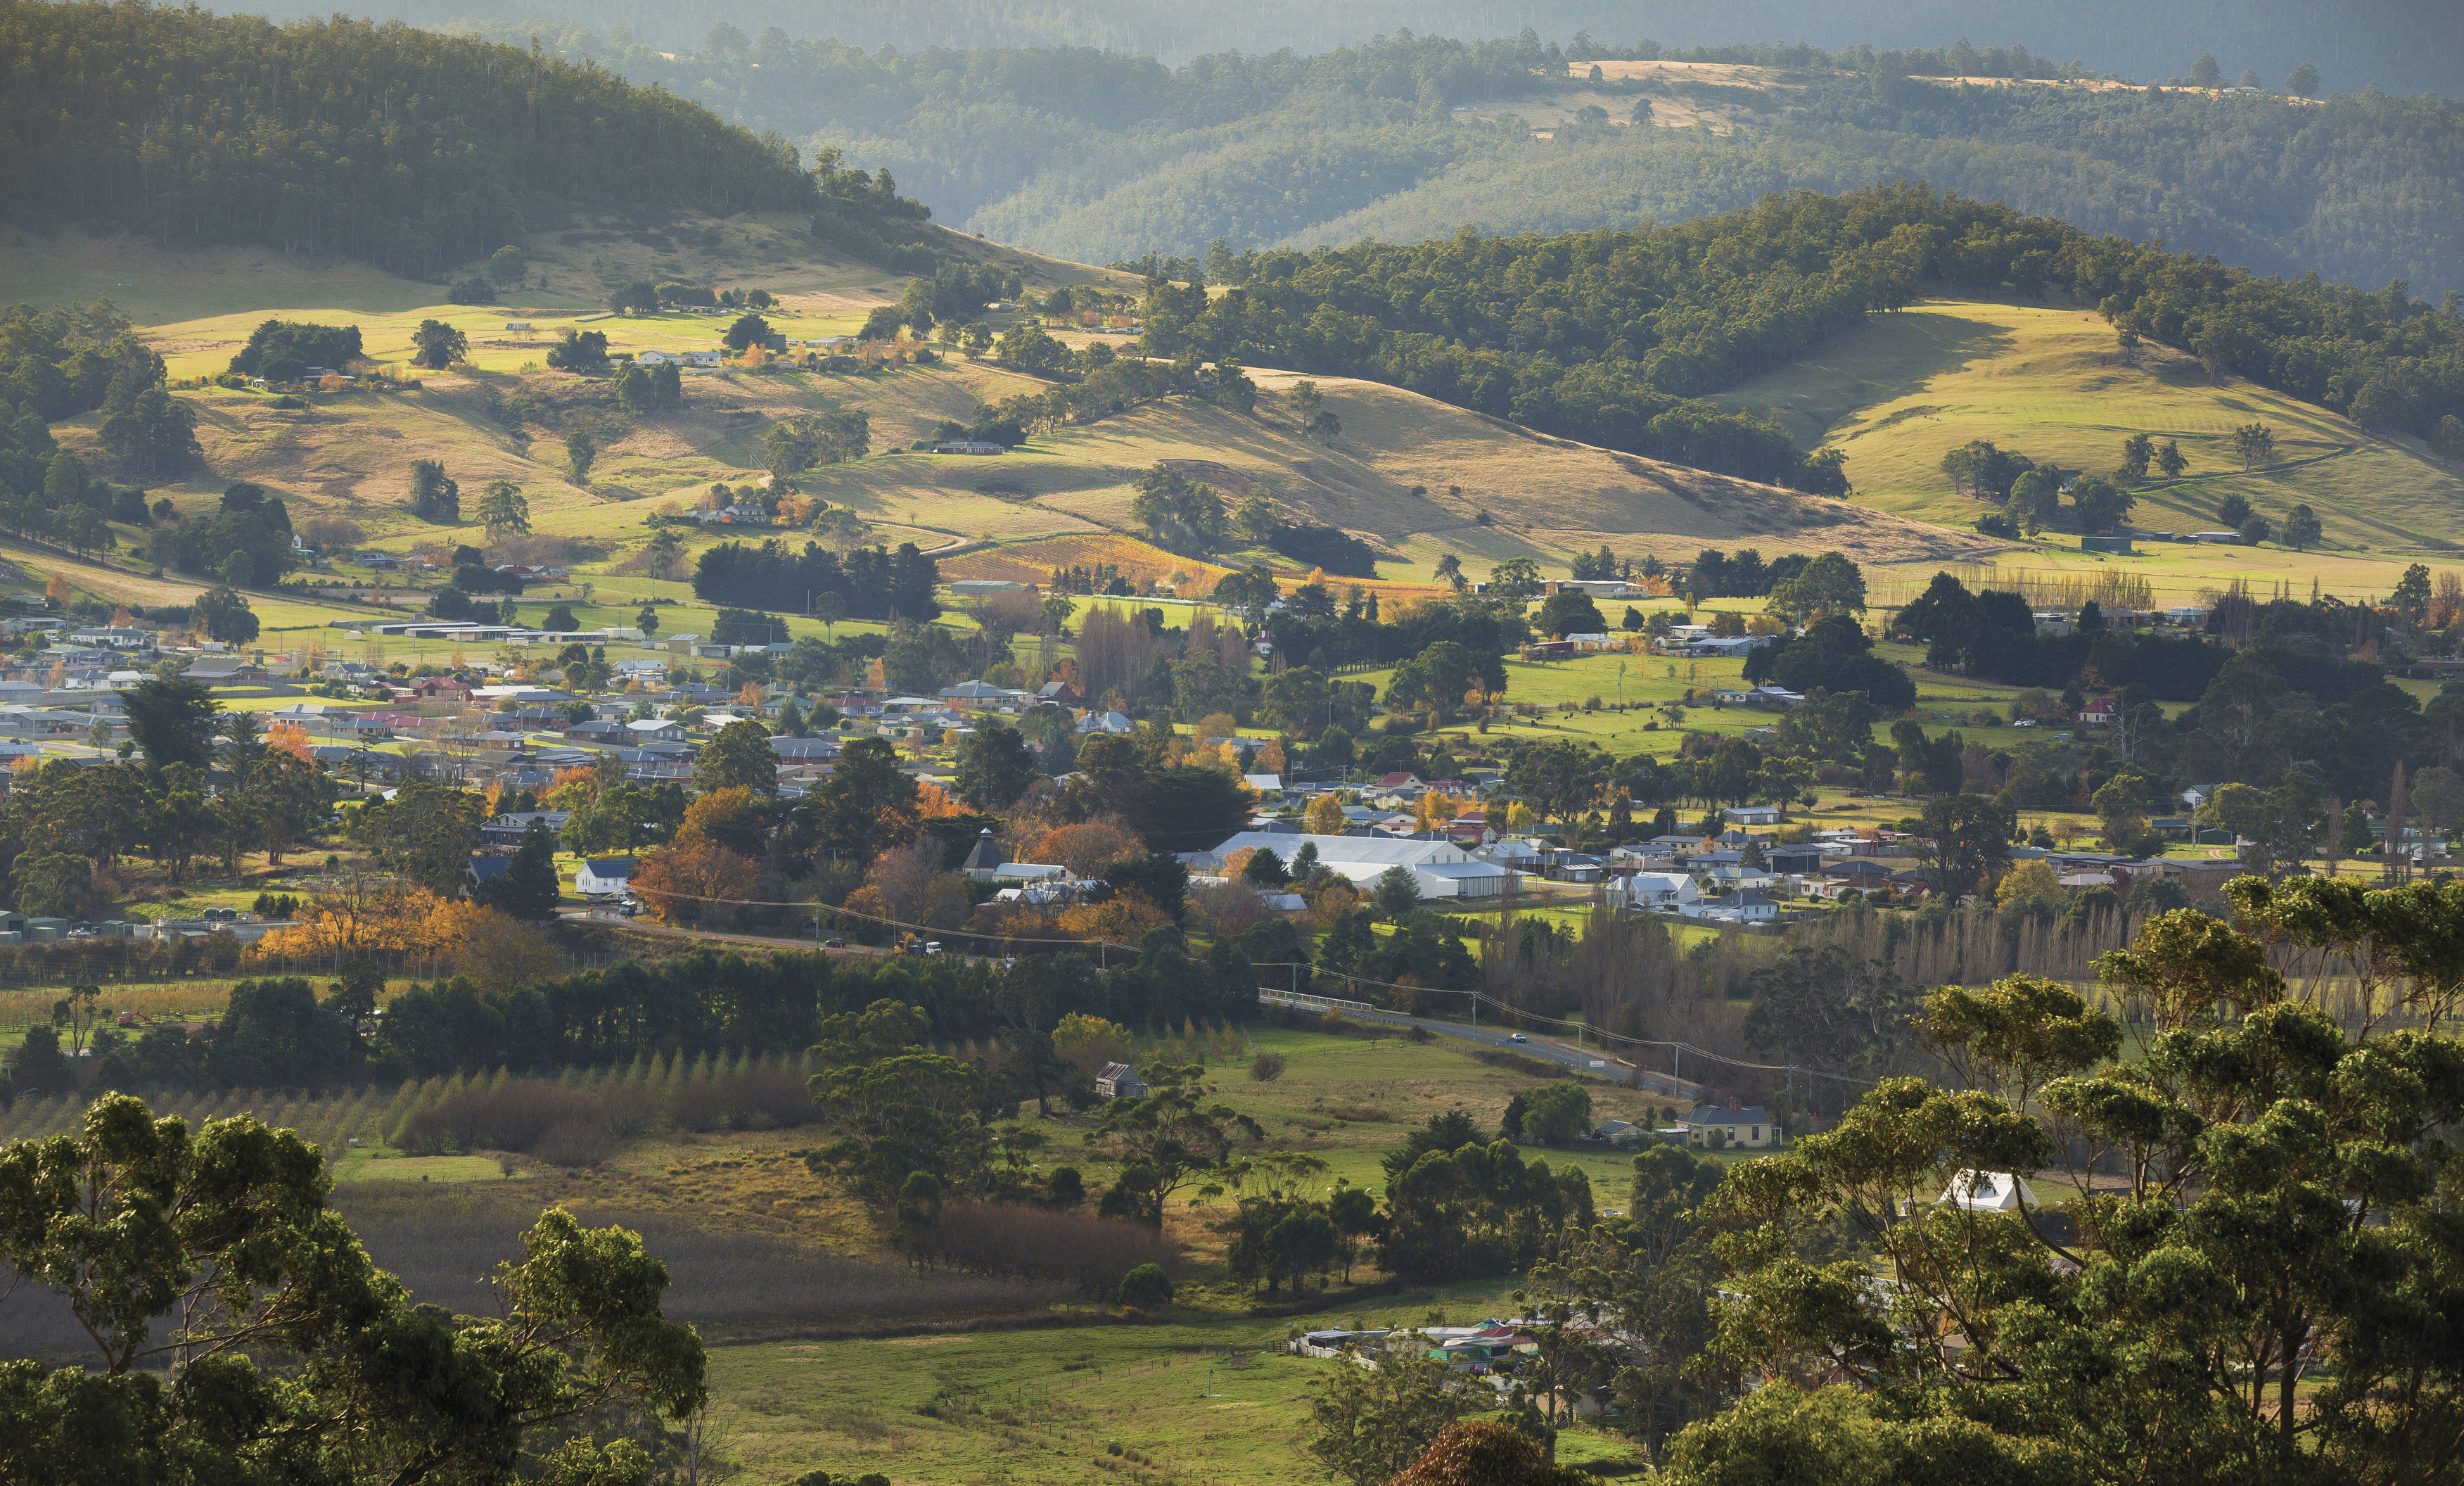 "View of the town at Huon Valley . Lush greenery surrounding housing, roads and farmland. "